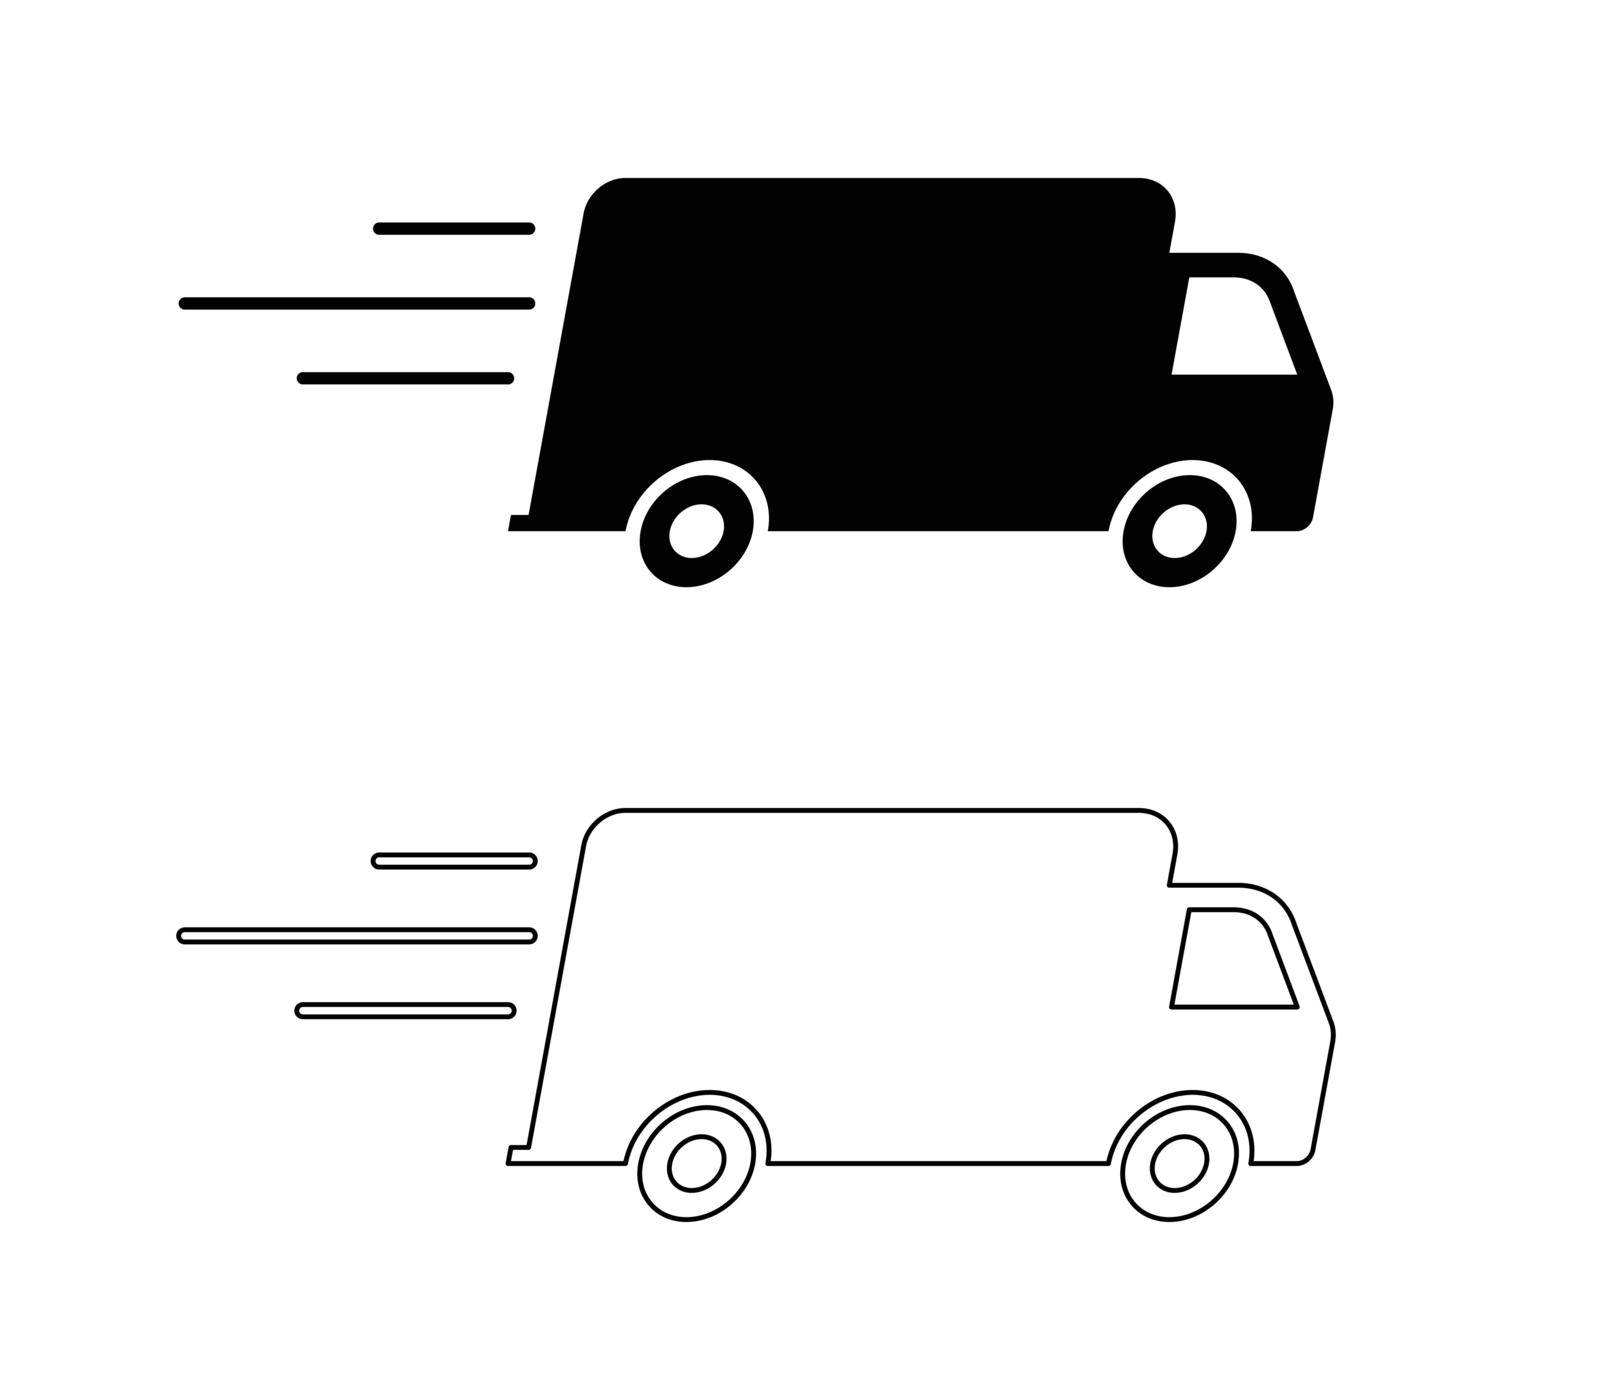 Fast Delivery Shipping Truck.  Black Illustration and Outline Isolated on a White Background. EPS Vector